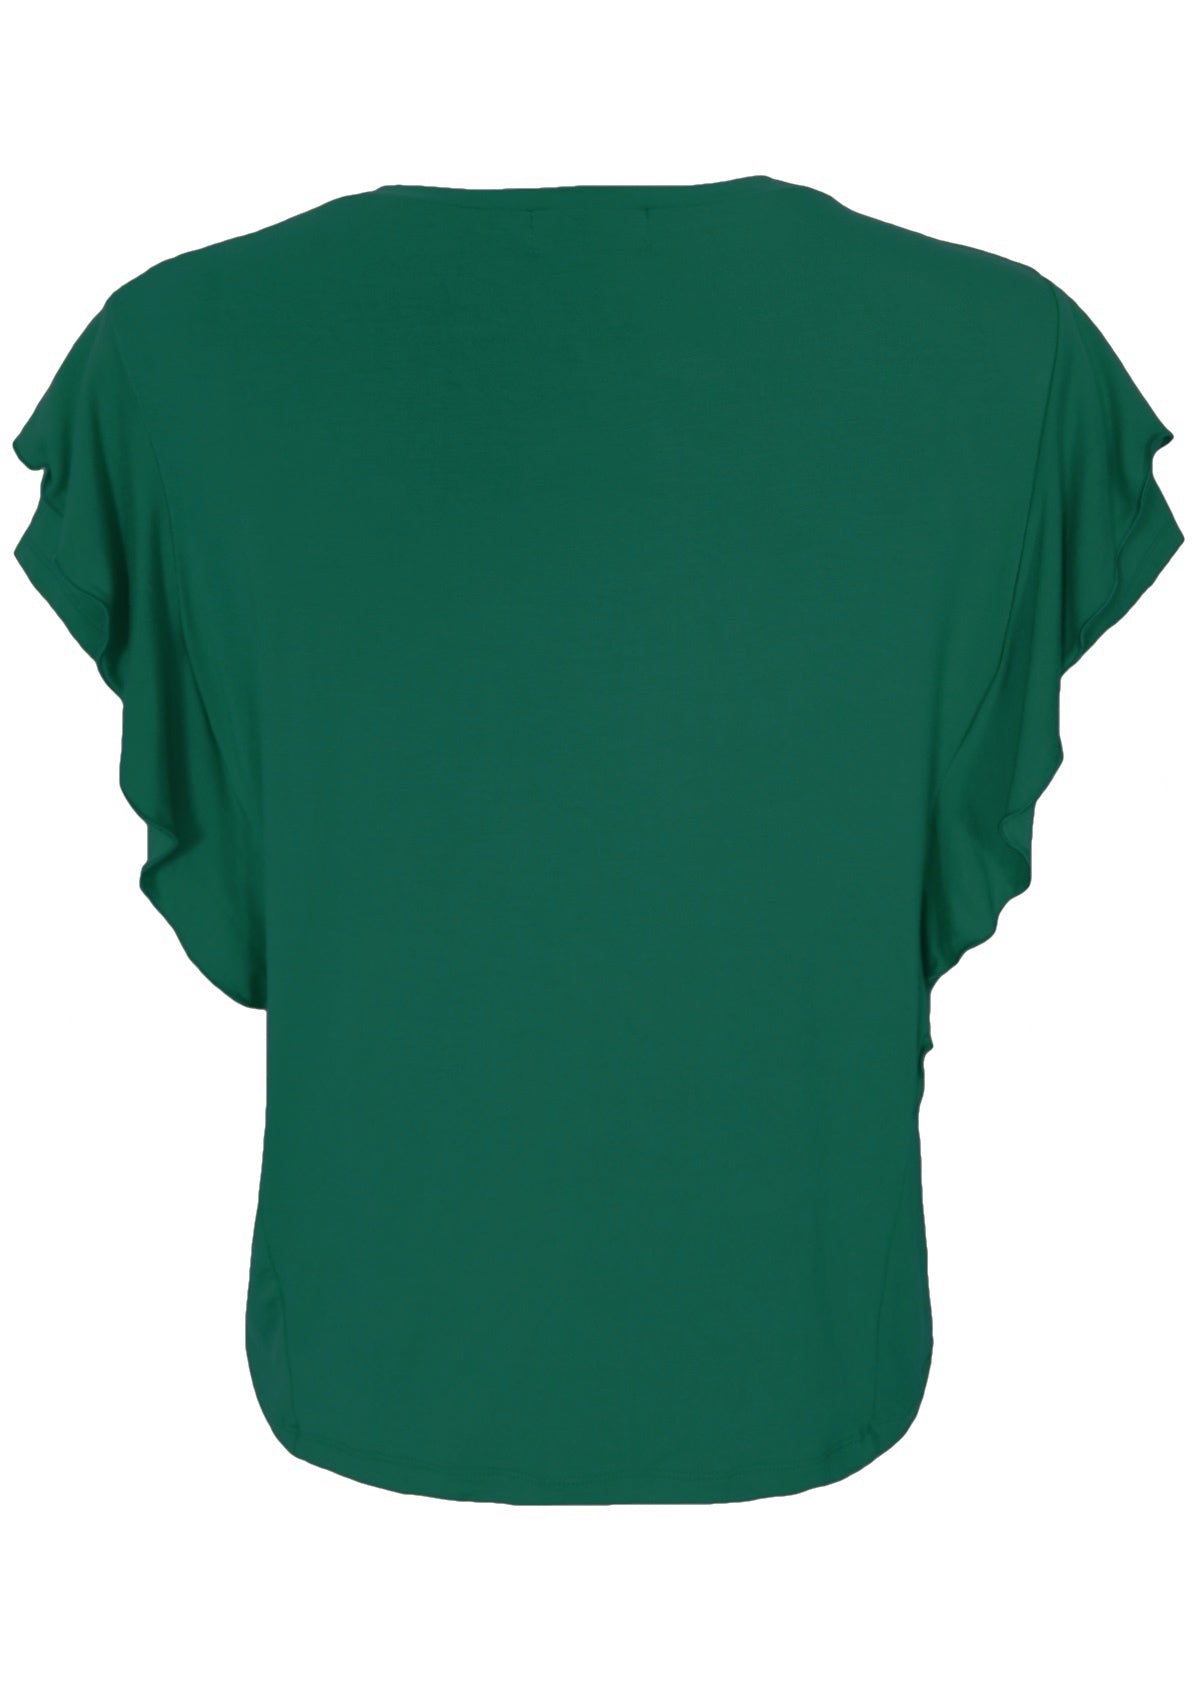 Back view of a ruffle green round neck rayon top.